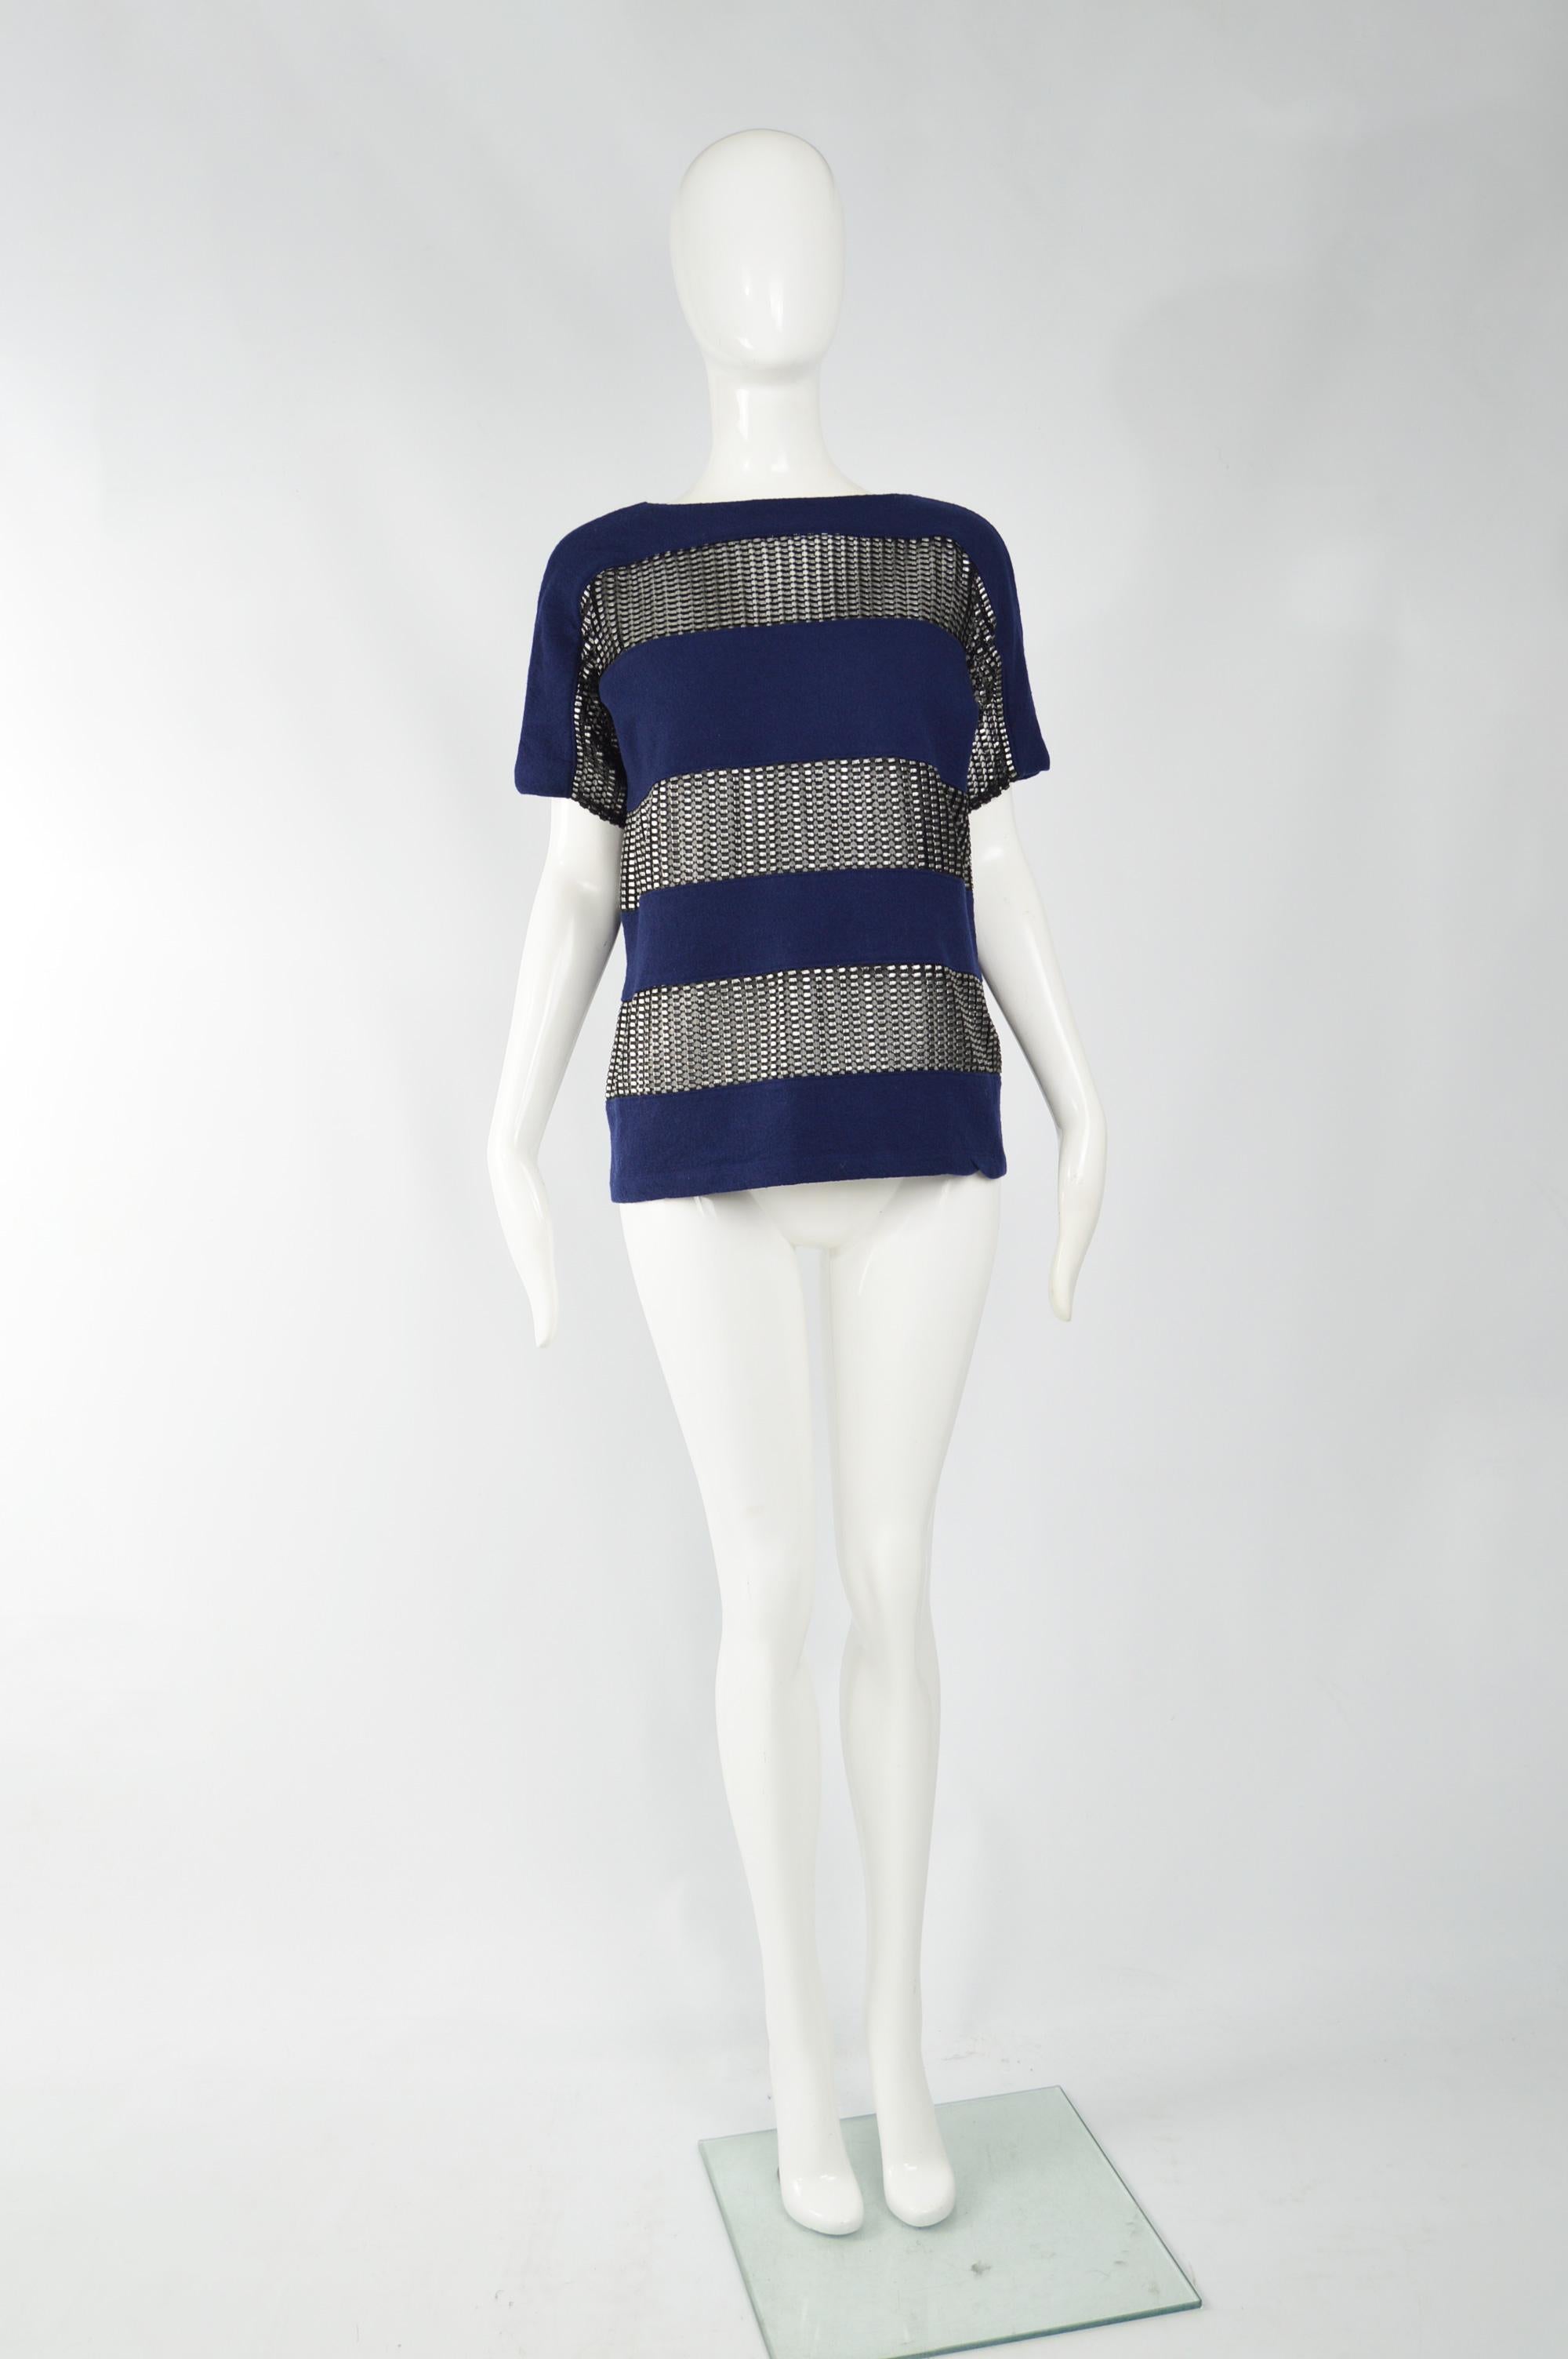 A striking Paco Rabanne women's short sleeve evening shirt in a blue virgin wool with sheer, metallic knit horizontal stripes that adds lots of sex appeal. Perfect for an evening event. 

Size: Marked 38 which is roughly a UK 10/ US 6 which gives a